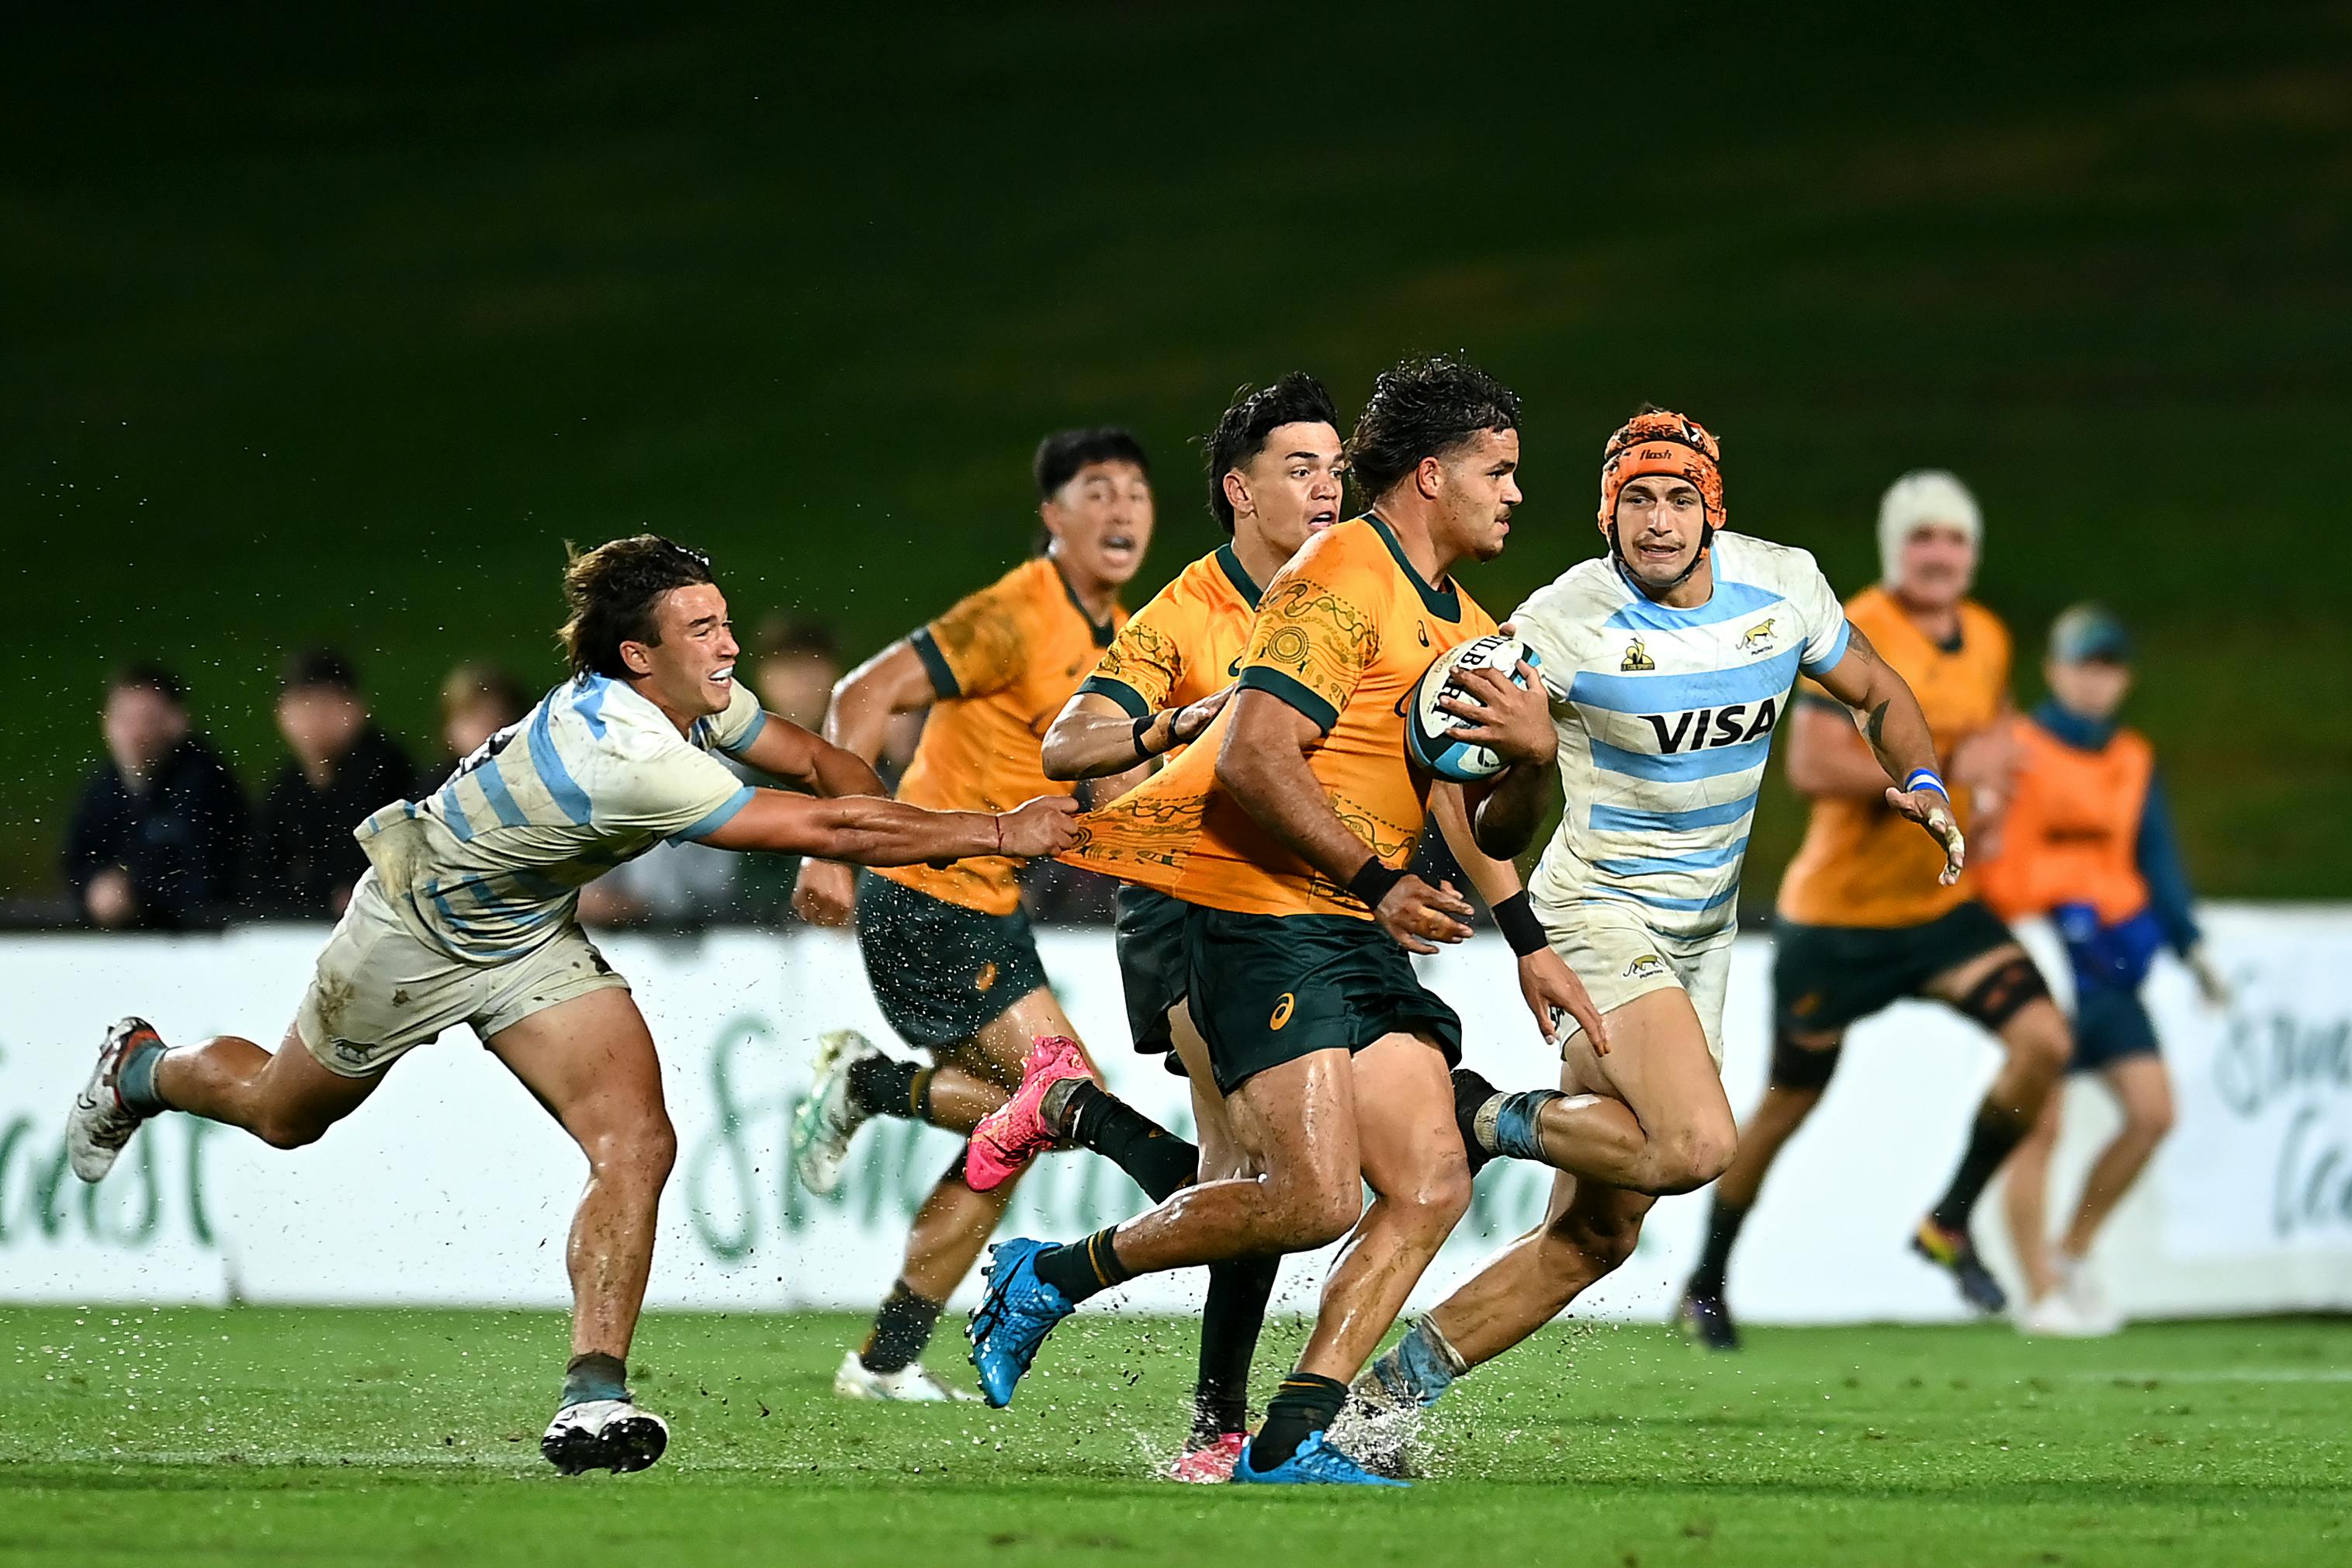 Yuin man and Brumbies centre Jarrah McLeod in the Dylan Pietsch-designed Australia U20s jersey. Photo: Getty Images